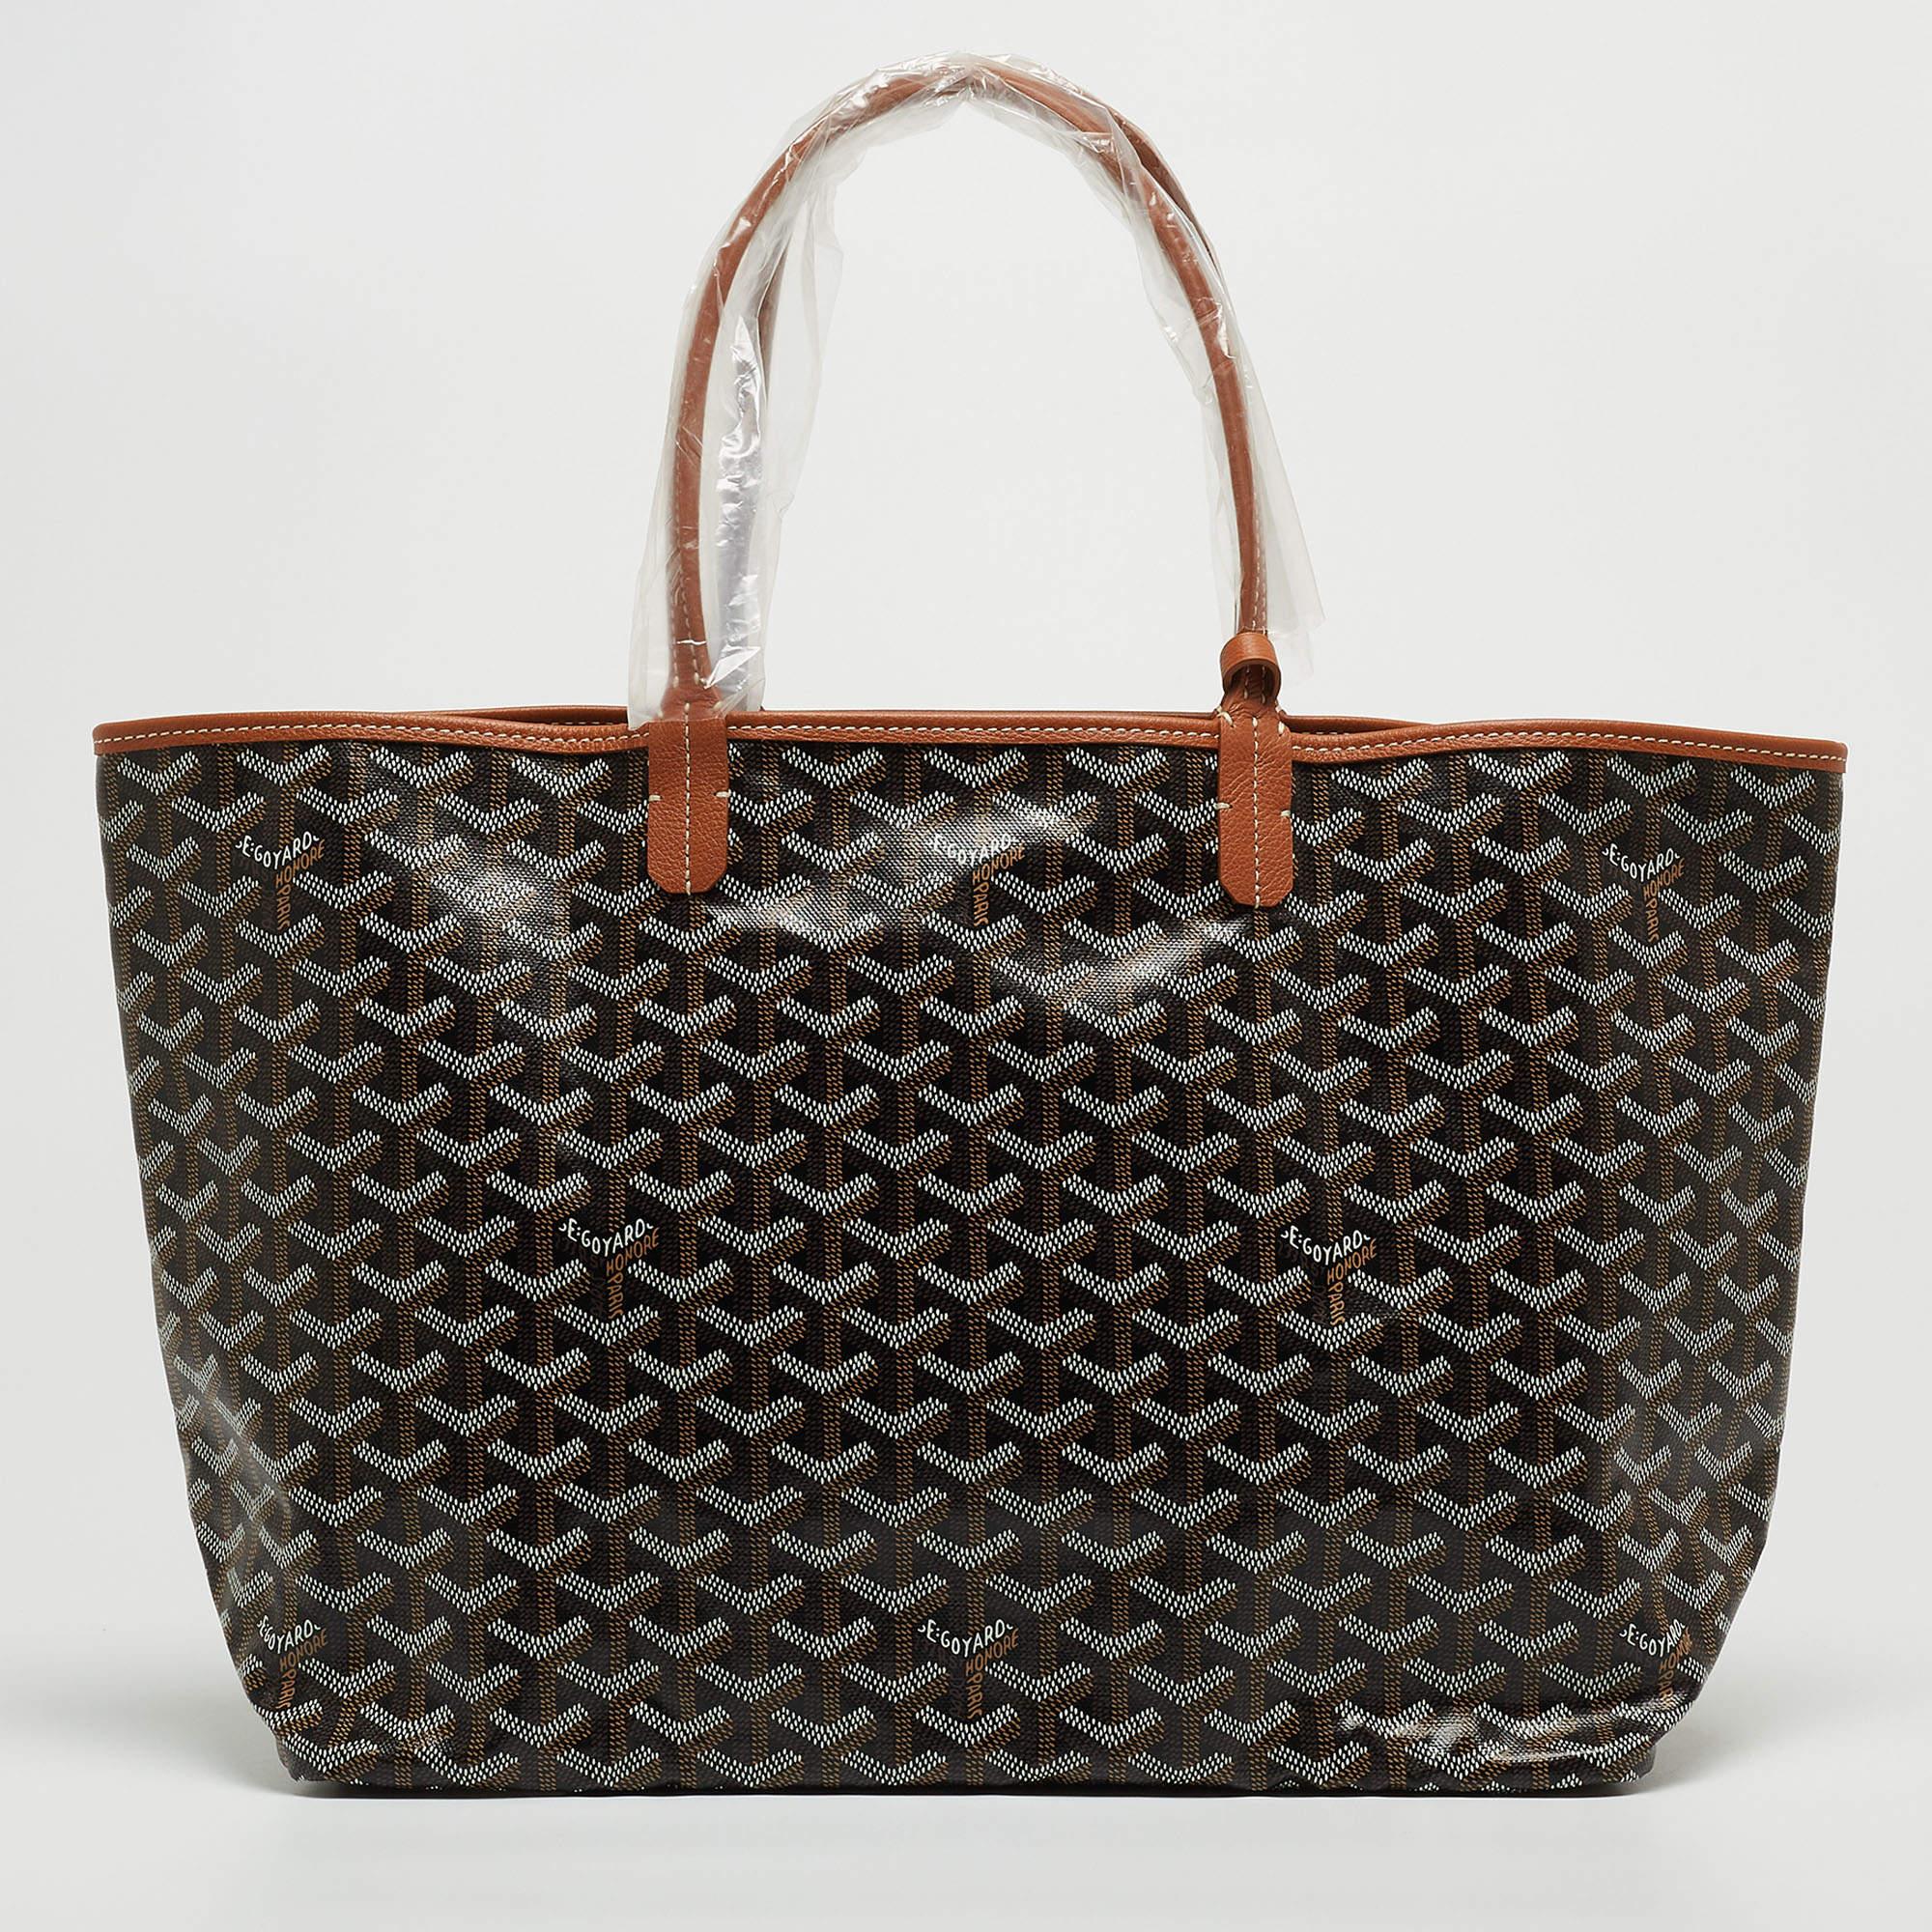 A charming creation by Goyard, this Saint Louis tote is the result of impeccable construction and artistic design. It is created from the signature Goyardine-coated canvas and leather into a versatile silhouette. With a perfect combination of